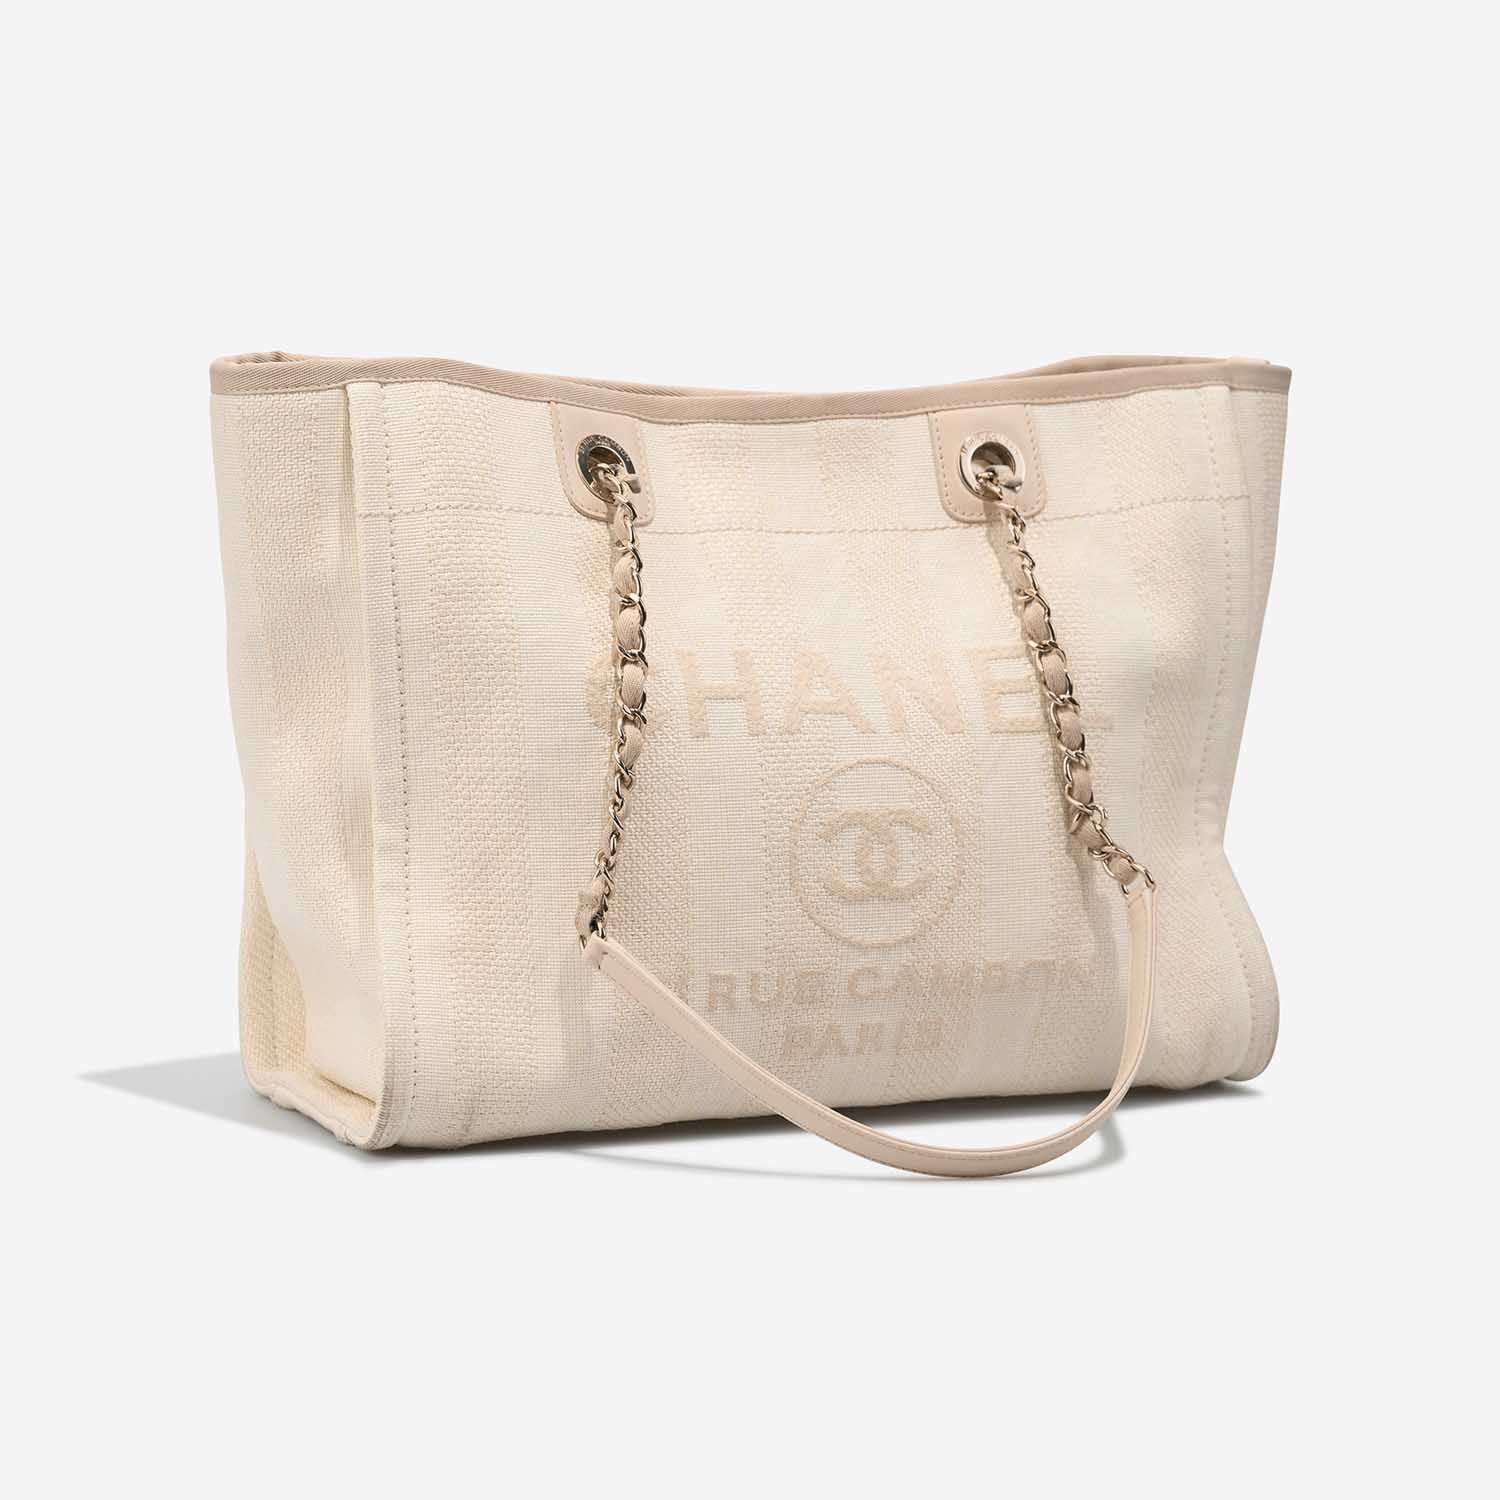 Chanel Deauville Small Canvas Cream | Sell your designer bag